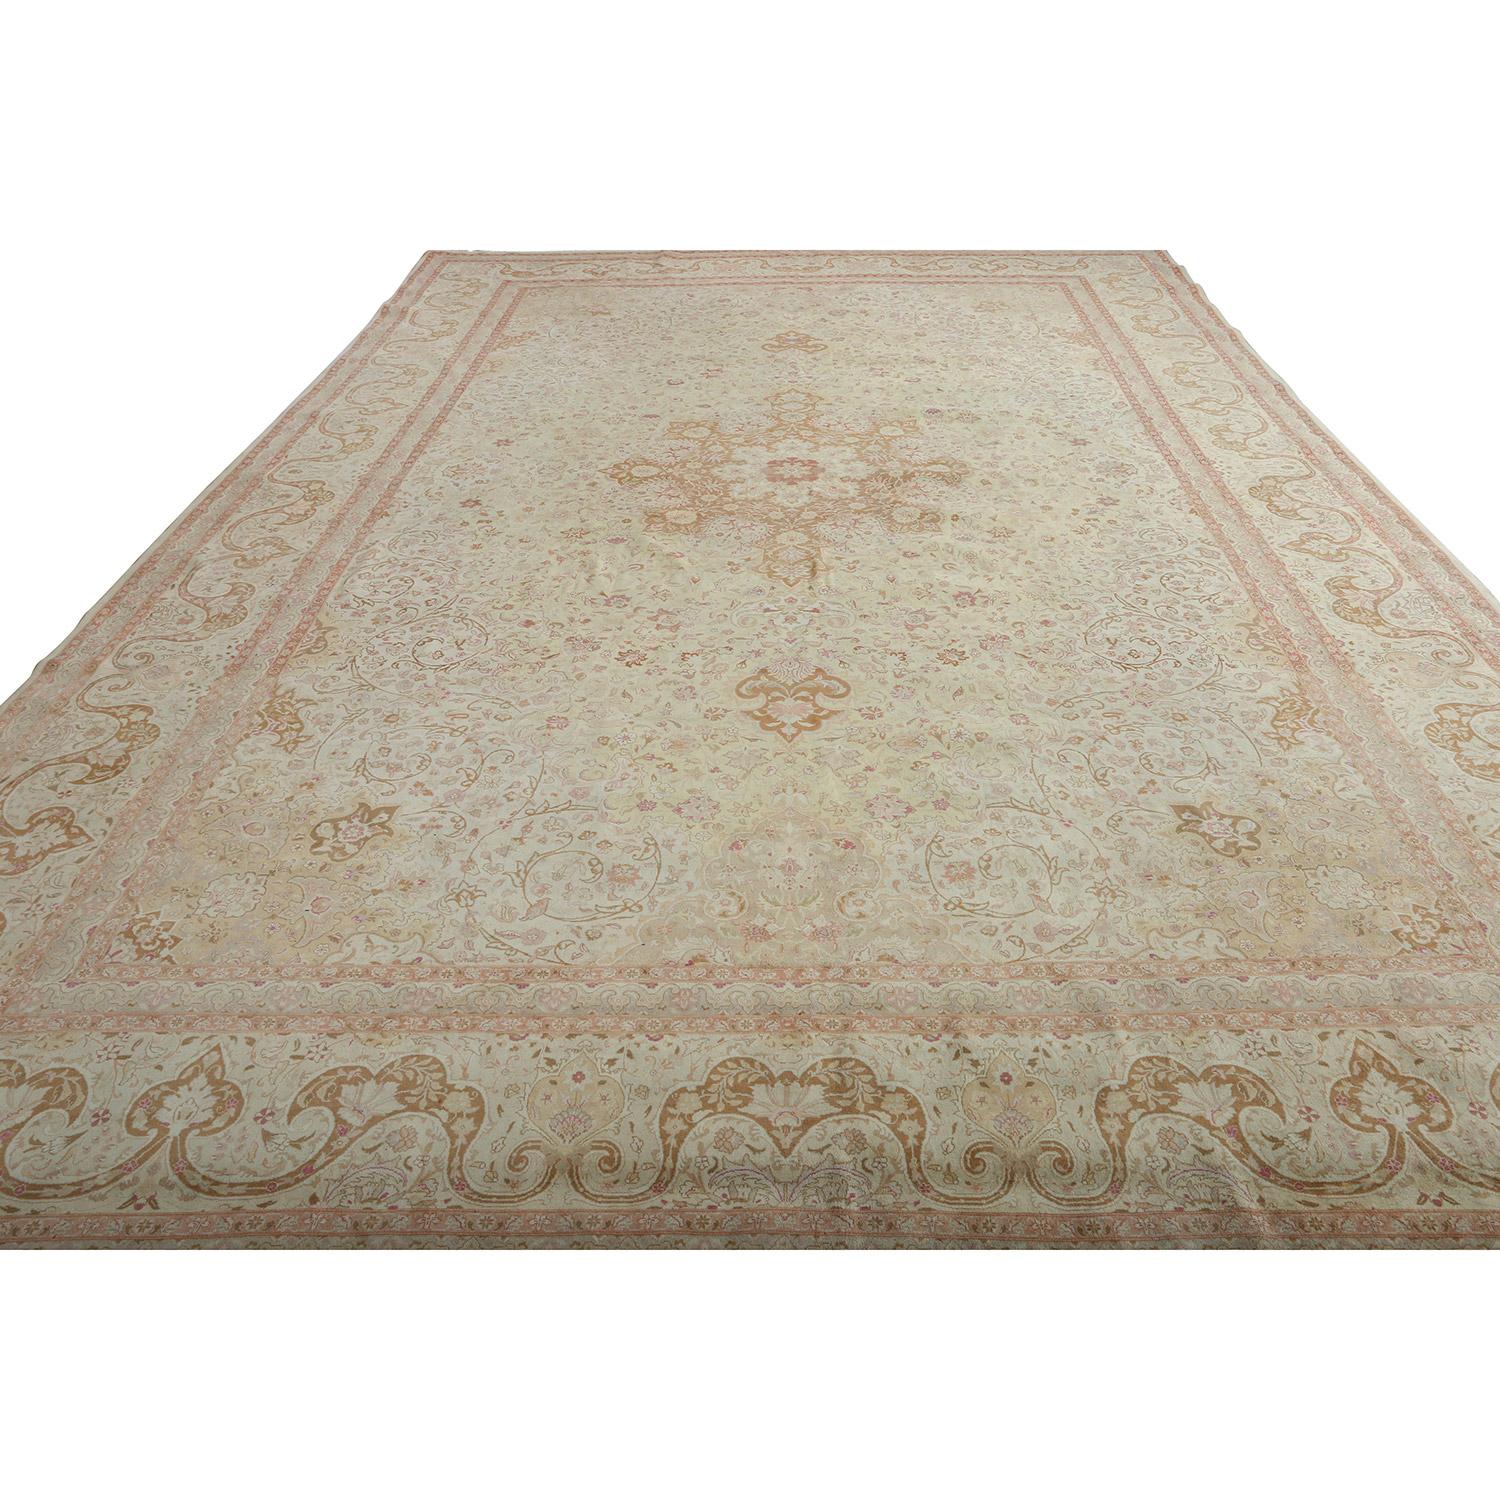 
This vintage Tabriz rug showcases a stunning center medallion design, a hallmark of Persian craftsmanship. What sets this rug apart is its remarkable knot count, with an impressive 500 notes per inch, a testament to the meticulous attention to